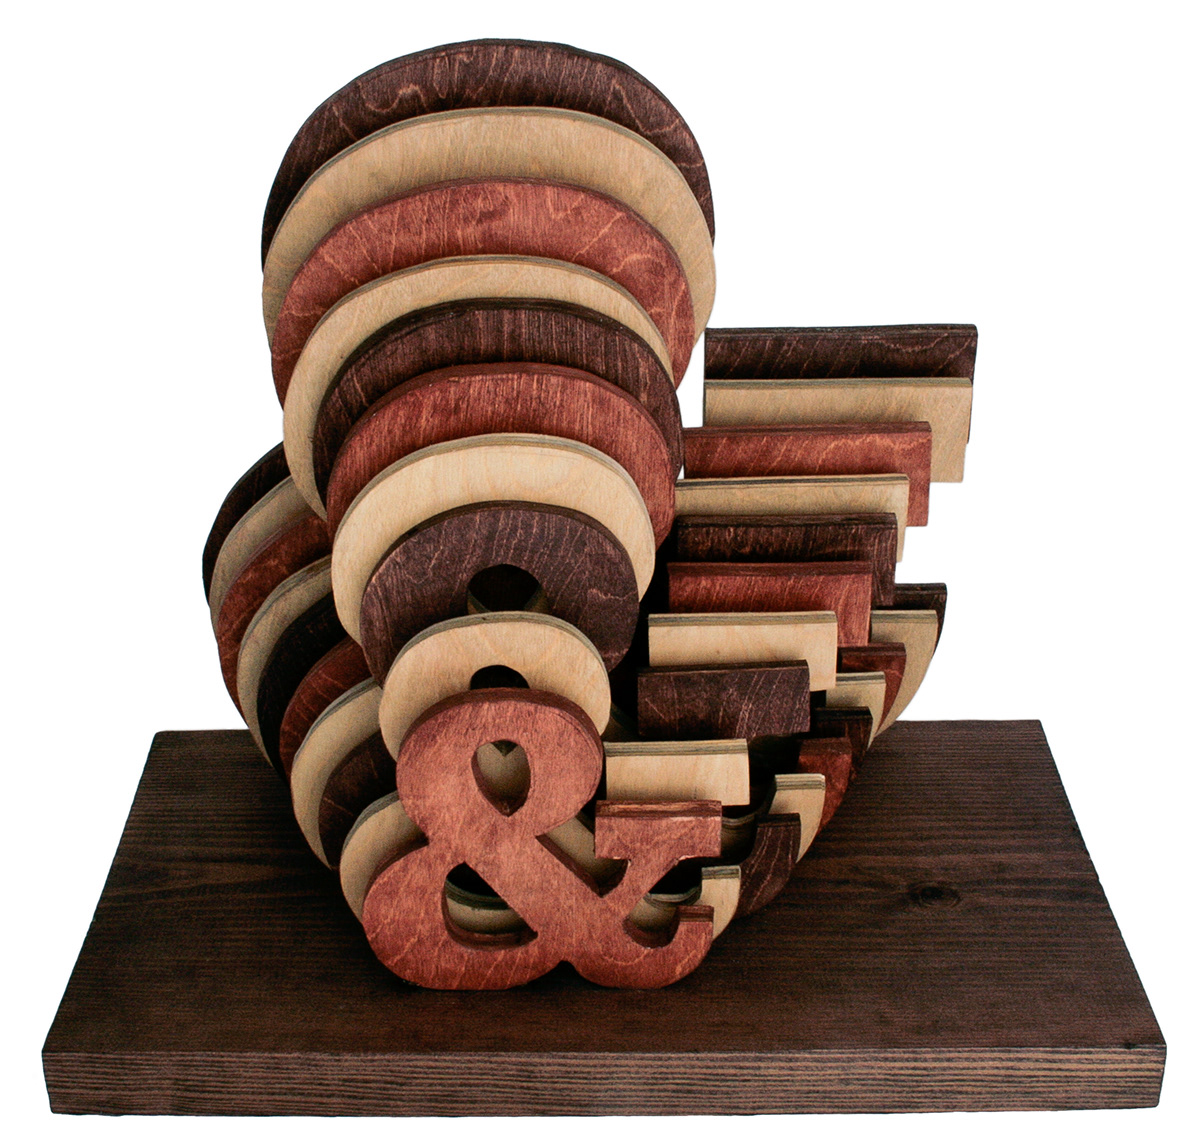 wood stained wood   ampersand sculpture type design